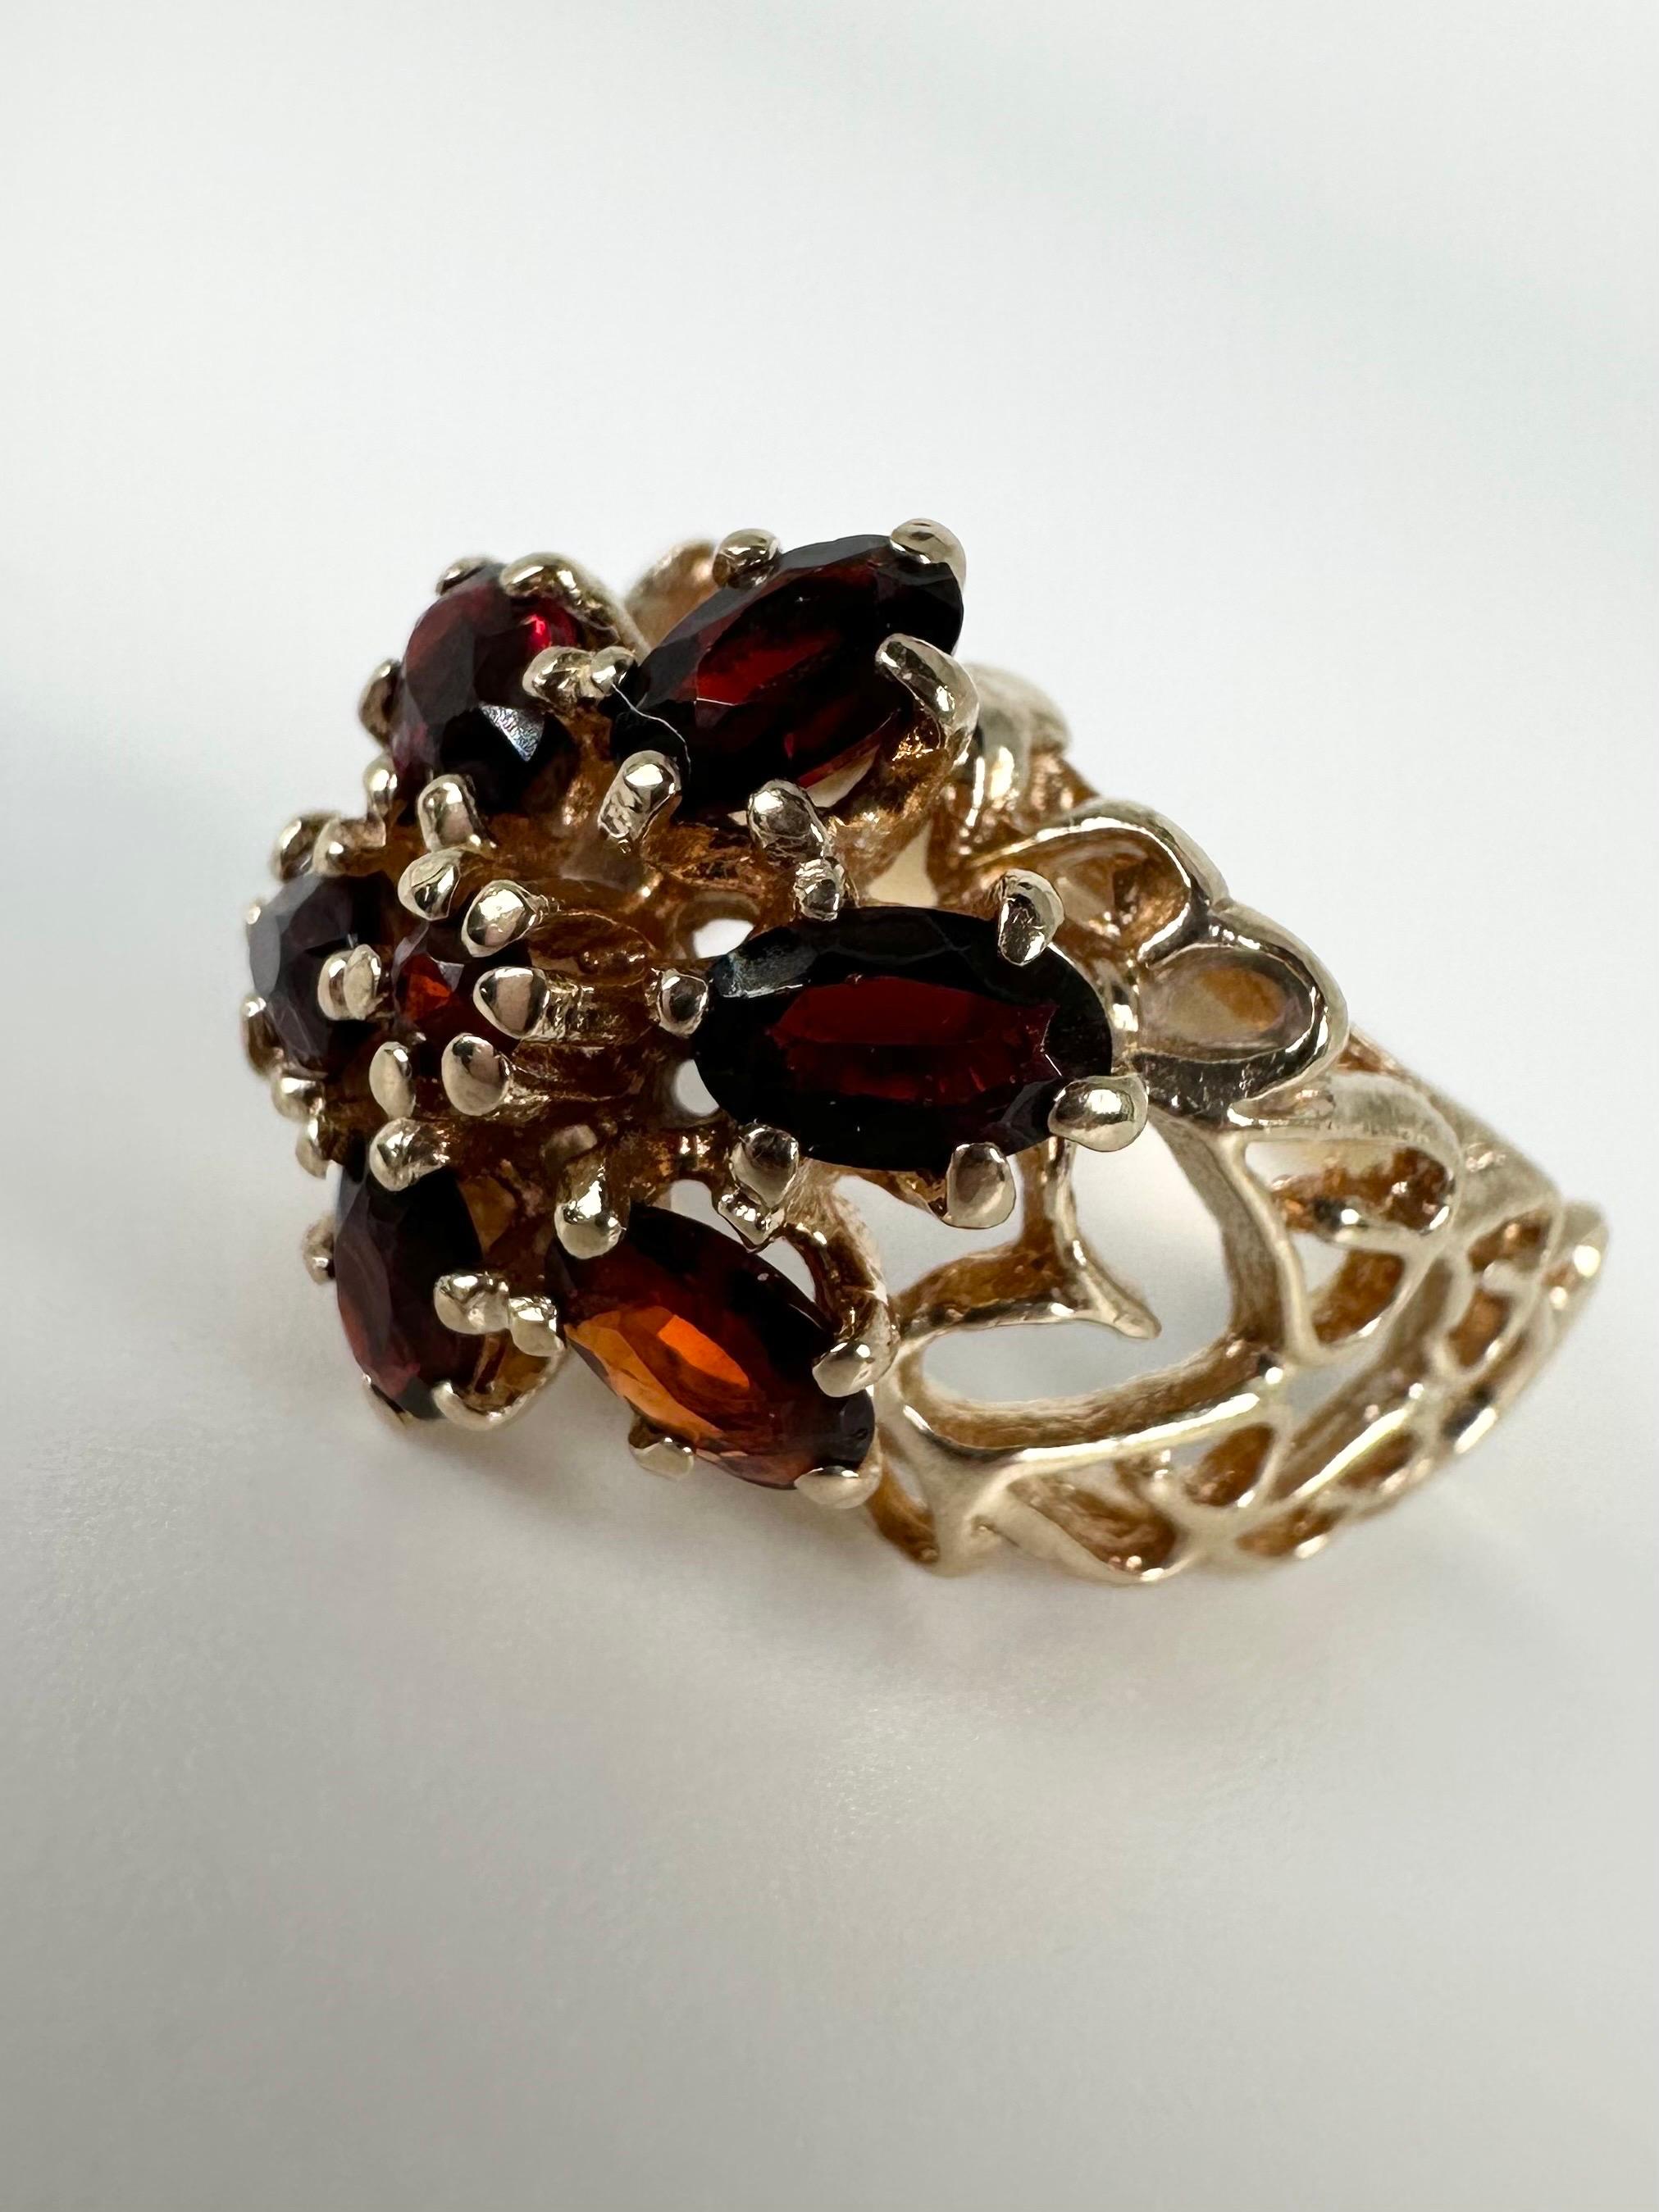 Unique designer ring made with three rows of baguette diamonds and blue sapphires in 14KT white gold.
Fun, bright summer ring with garnets in 10KT yellow gold. All natural garnets in vintage filigree setting.

GOLD: 10KT gold
NATURAL